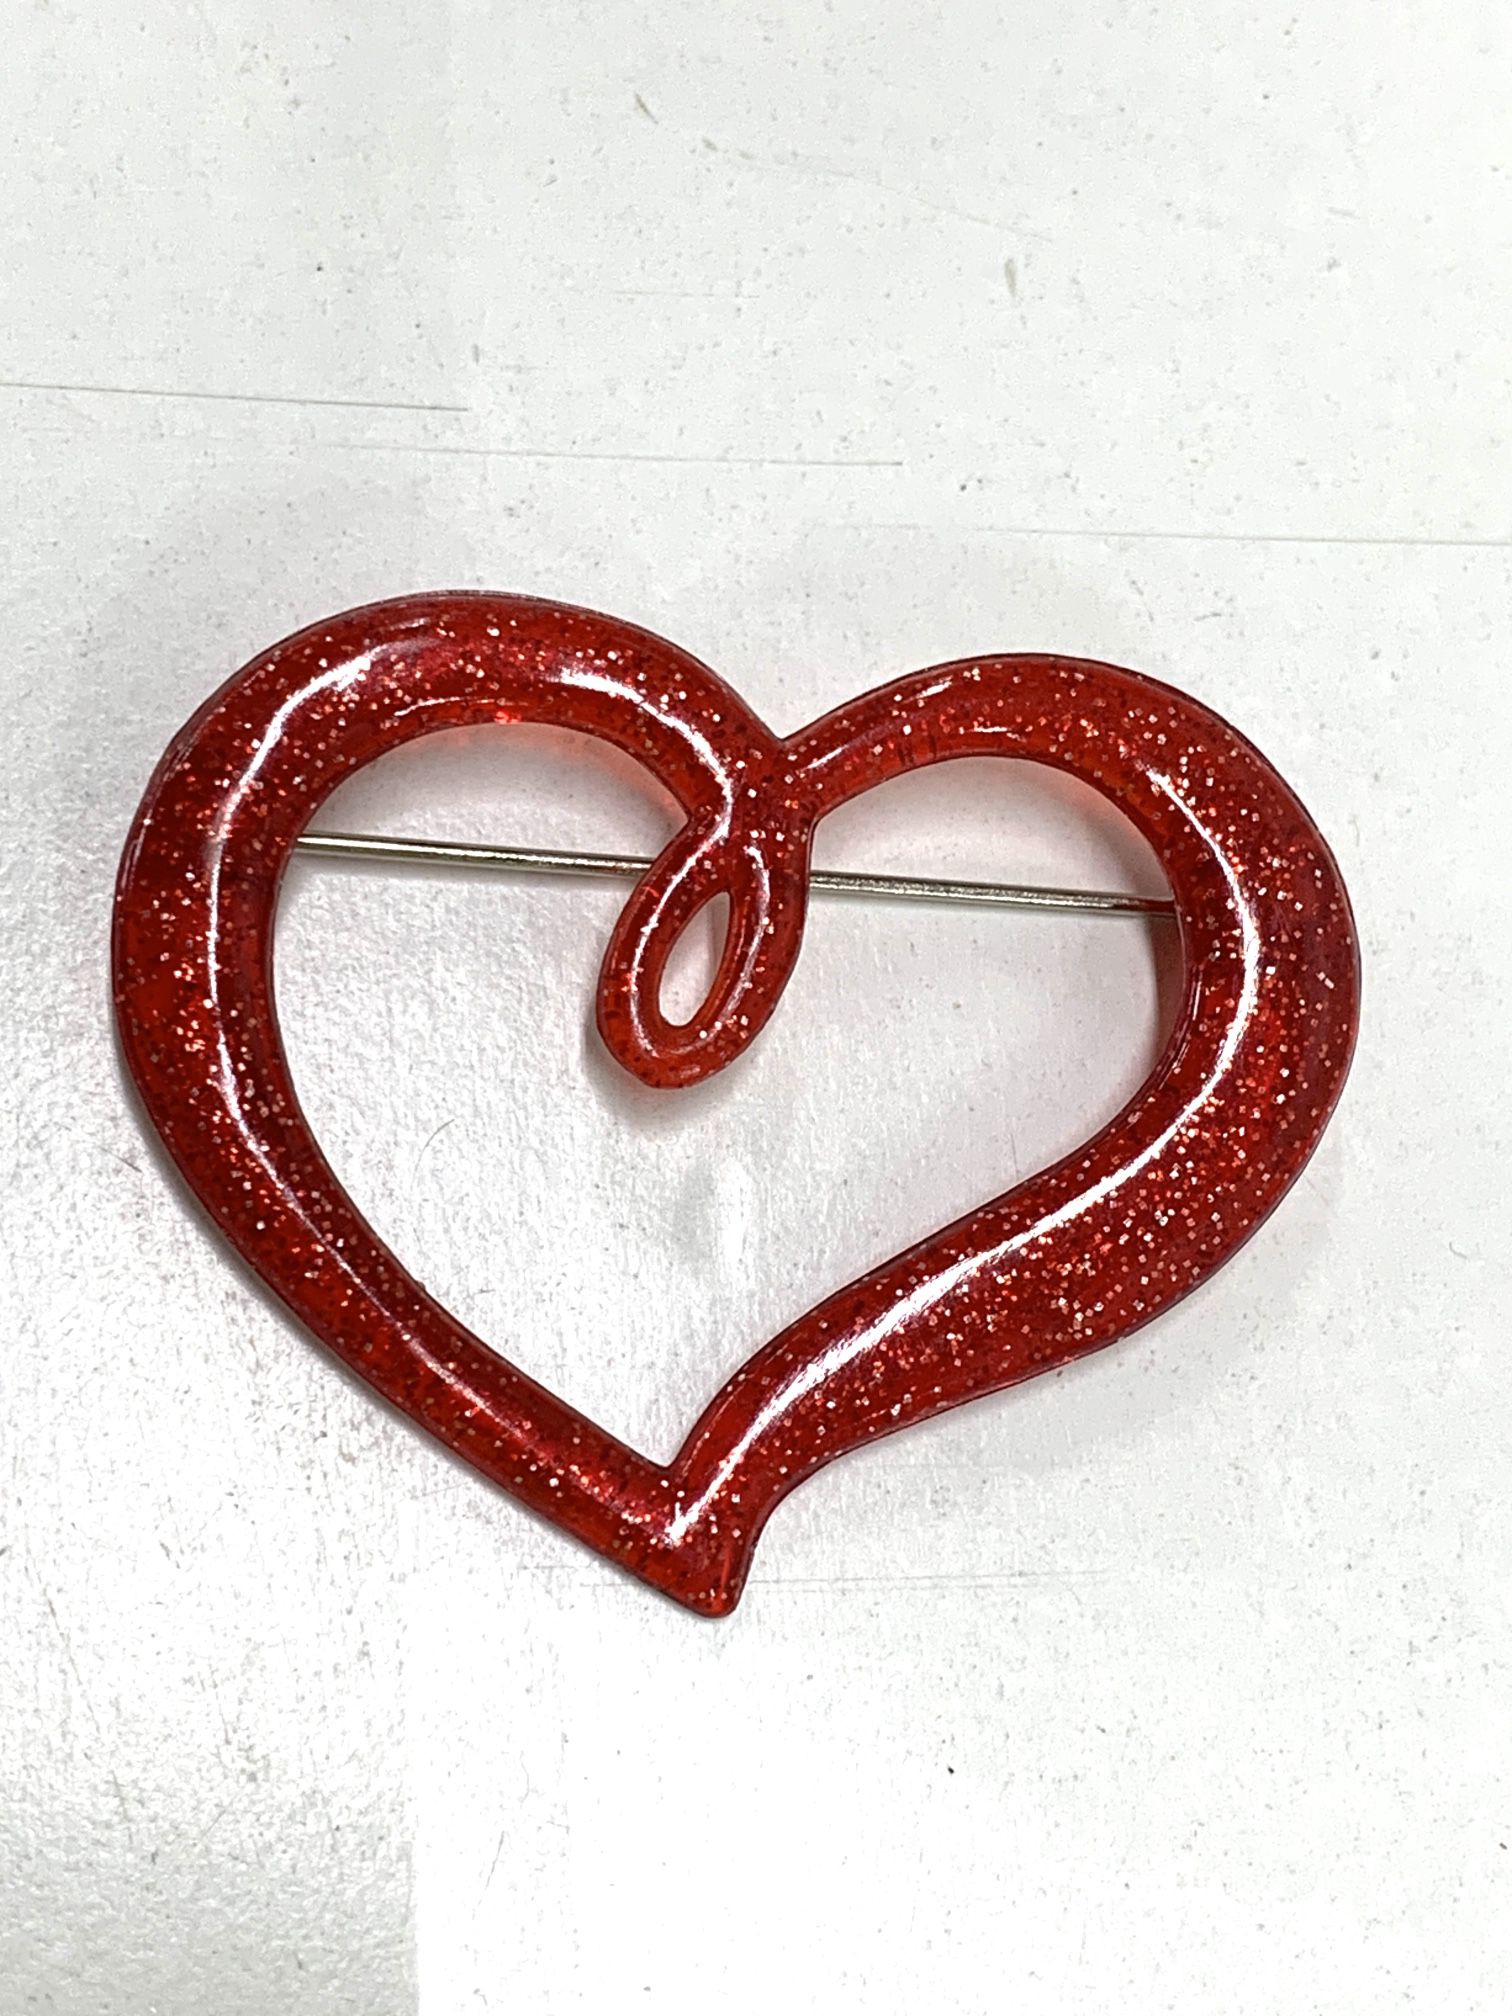 Valentines Day Gibson Greetings Glitter Heart Brooch Pin Red Heart Pin 1(contact info removed)